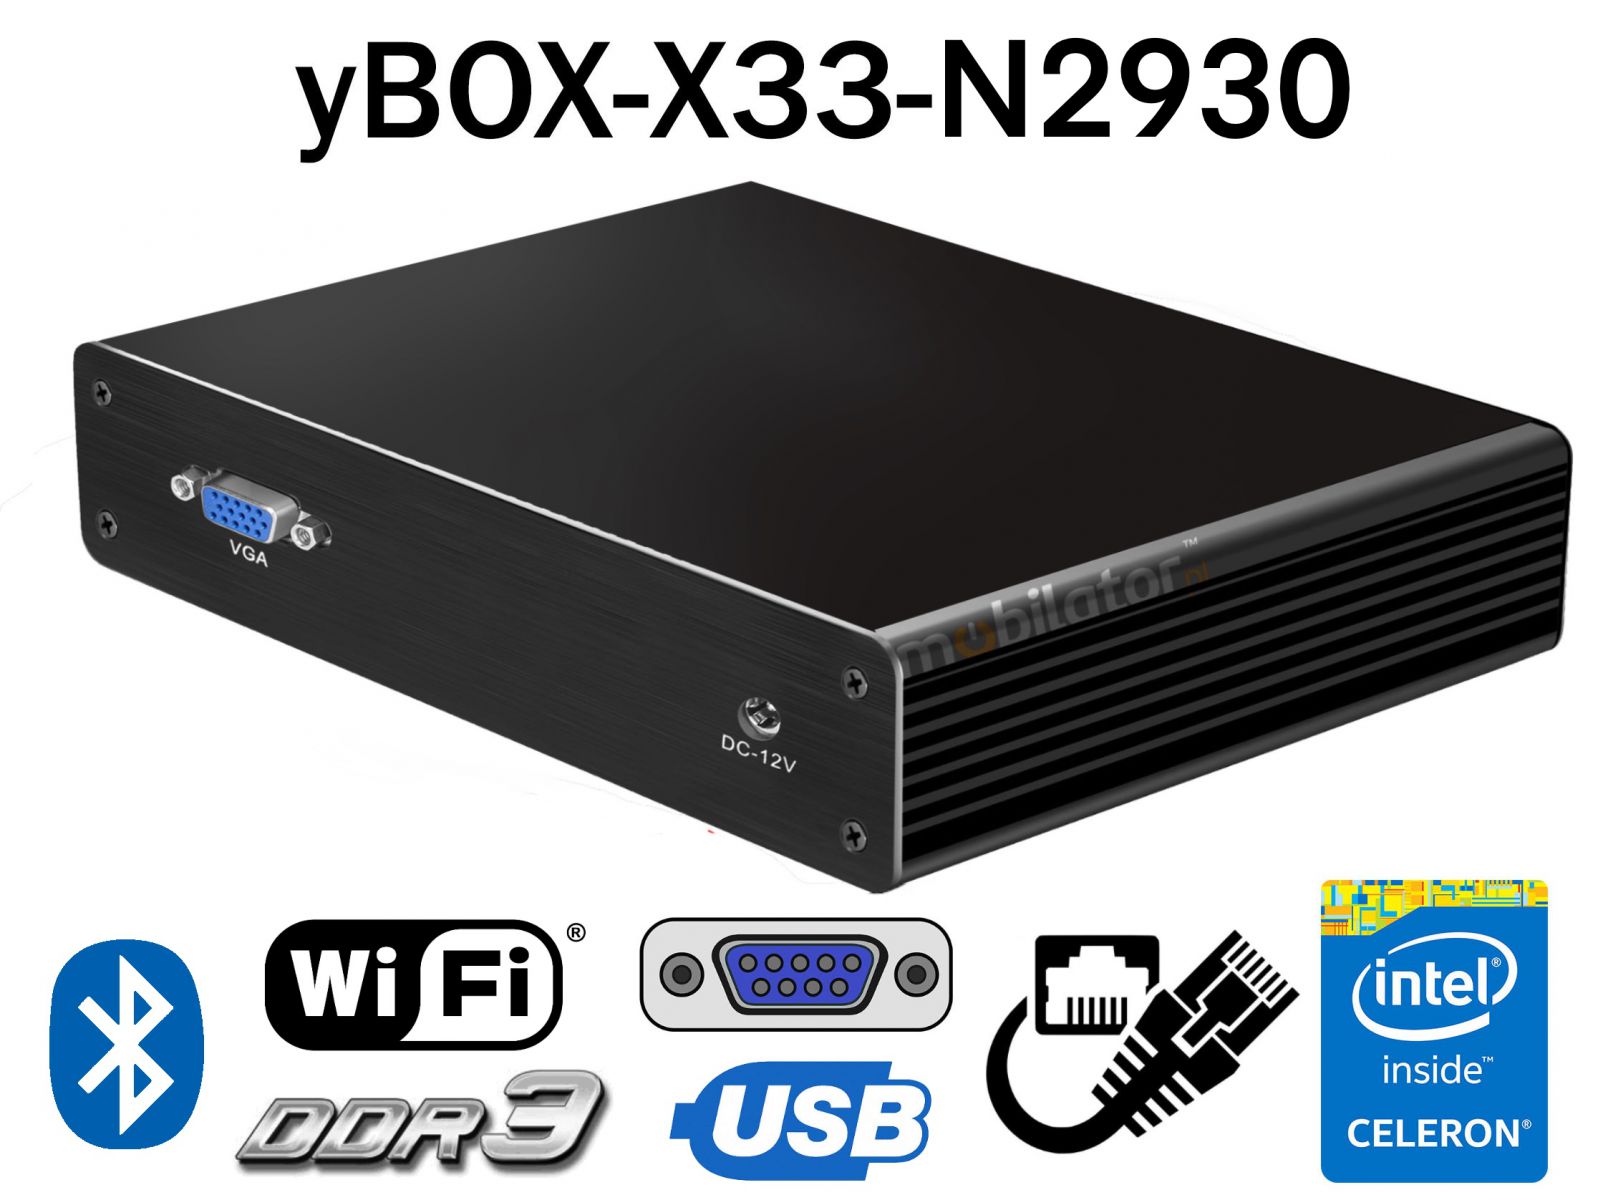 Robust aluminum MiniPC for industry with 8GB RAM and M. 2 SSD support, 256GB SSD for office and work yBOX-X33-(6xLAN)-N2930 v. 4